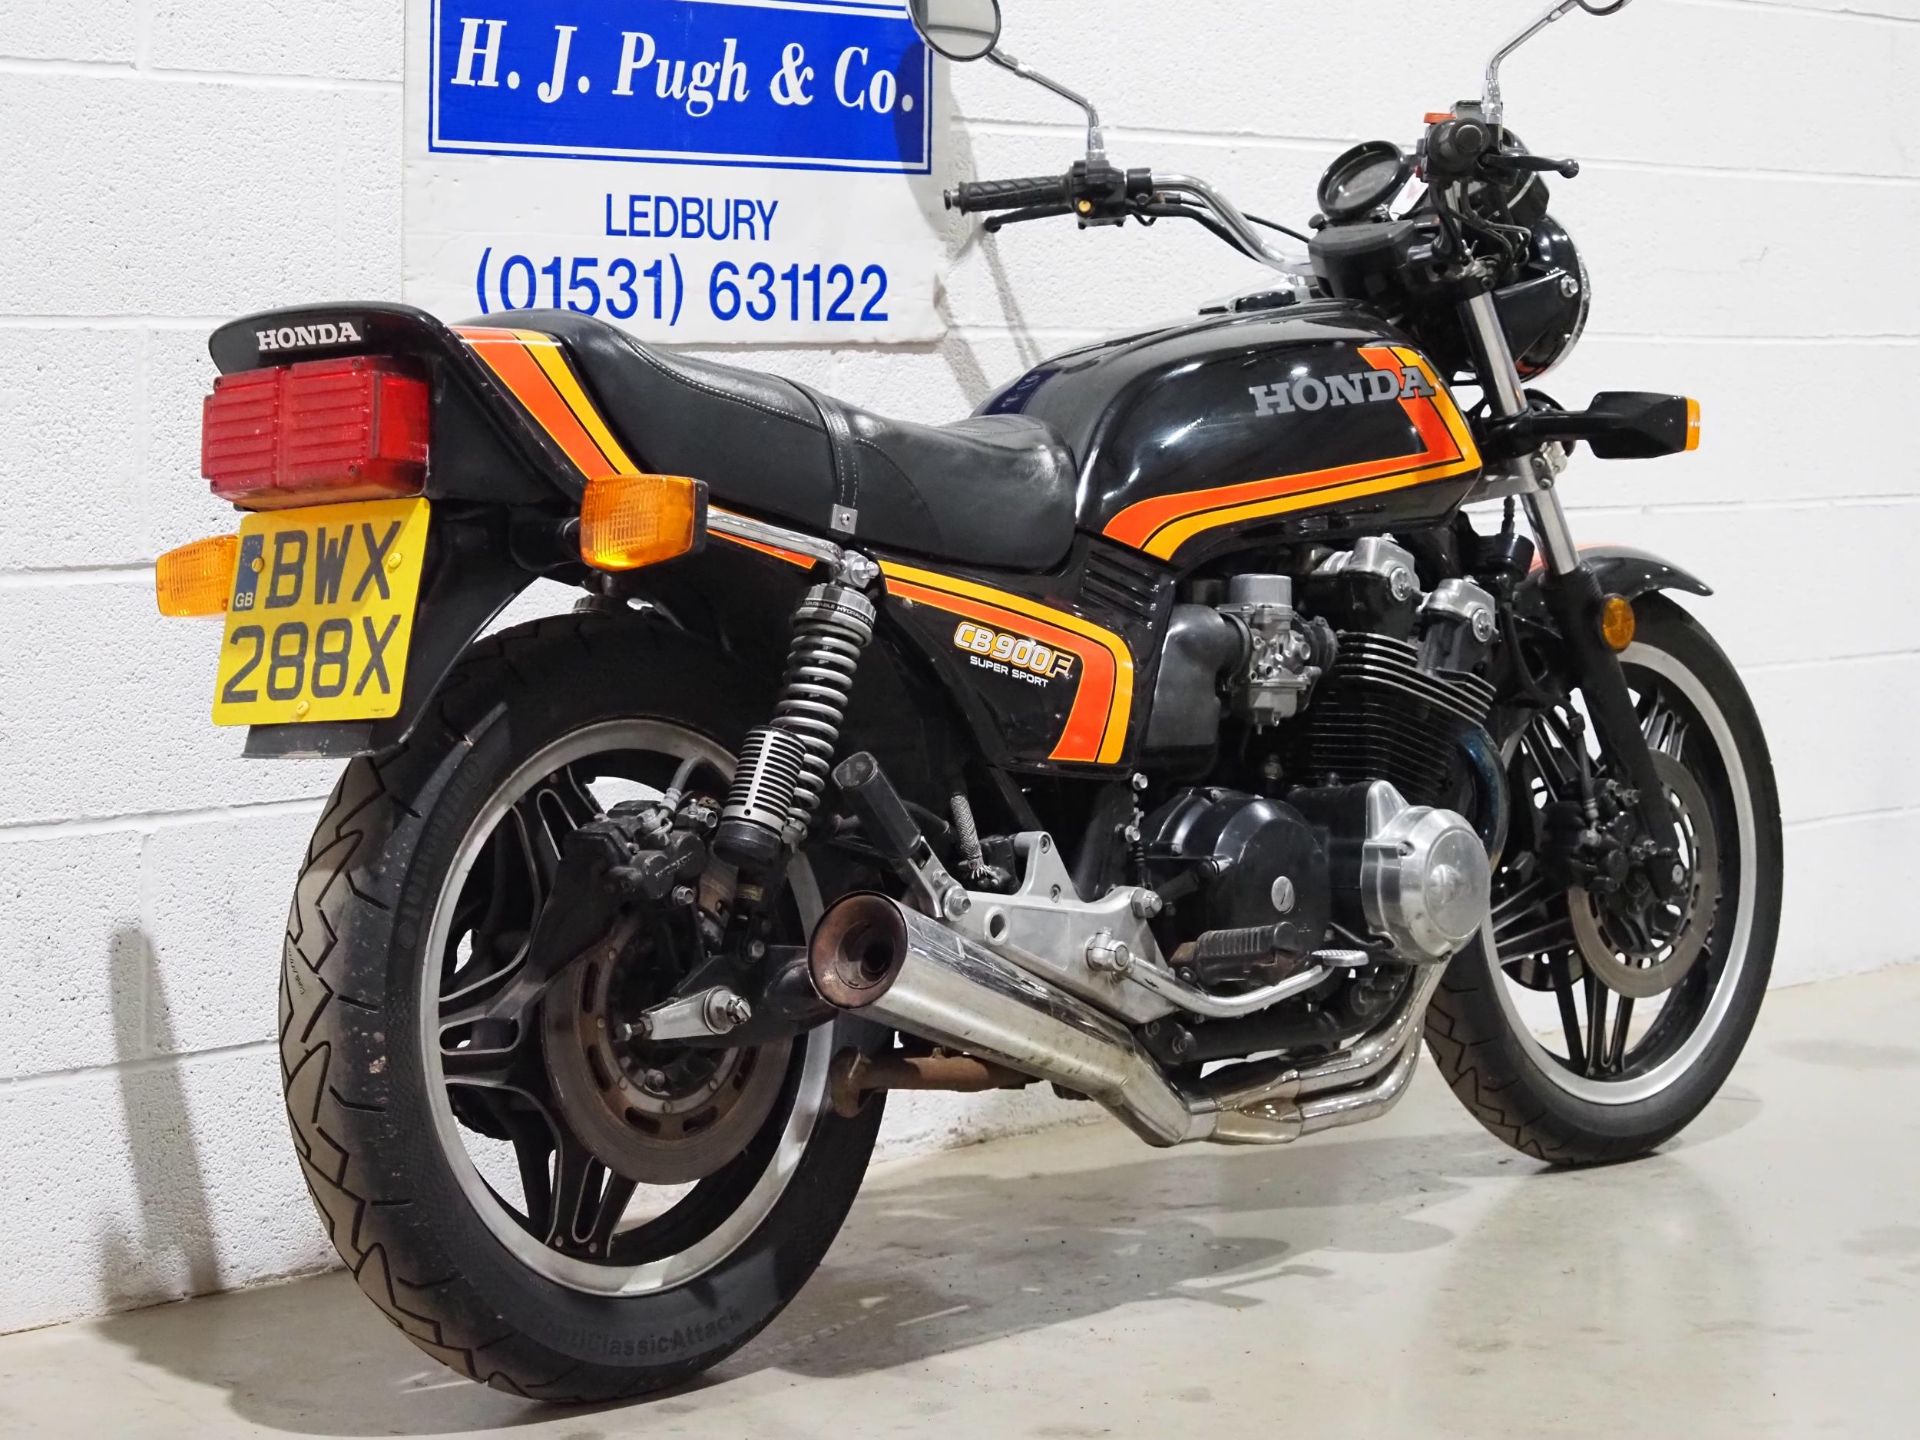 Honda CB900F SuperSport motorcycle. 1982. 901cc. Runs and rides. Recent new tyres. Comes with MOT - Image 3 of 6